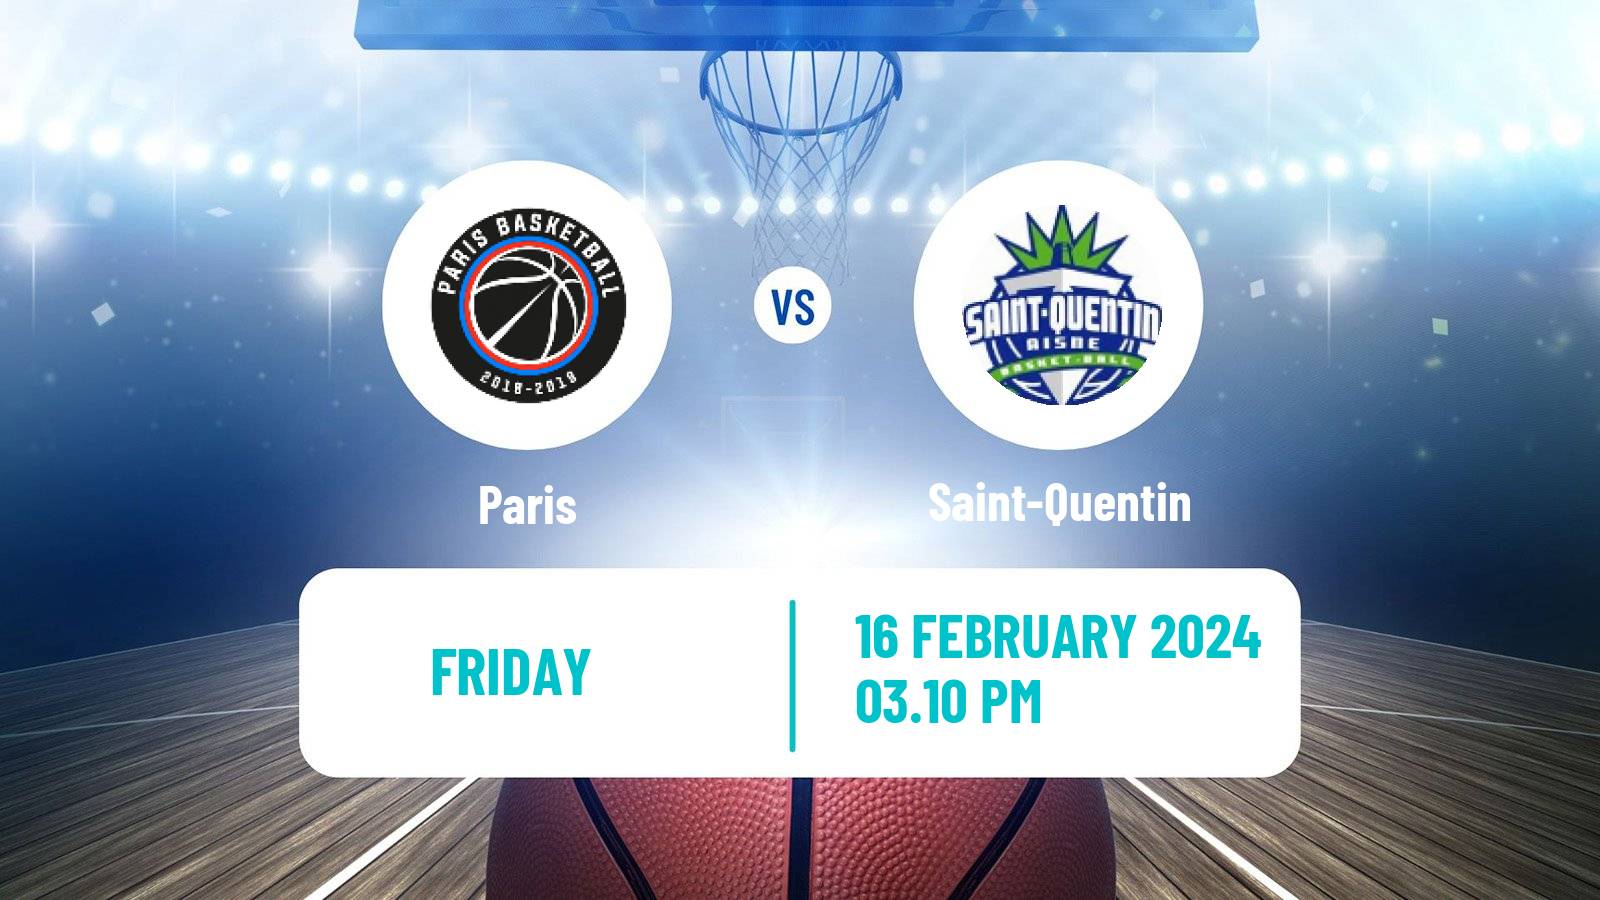 Basketball French Leaders Cup Basketball Paris - Saint-Quentin